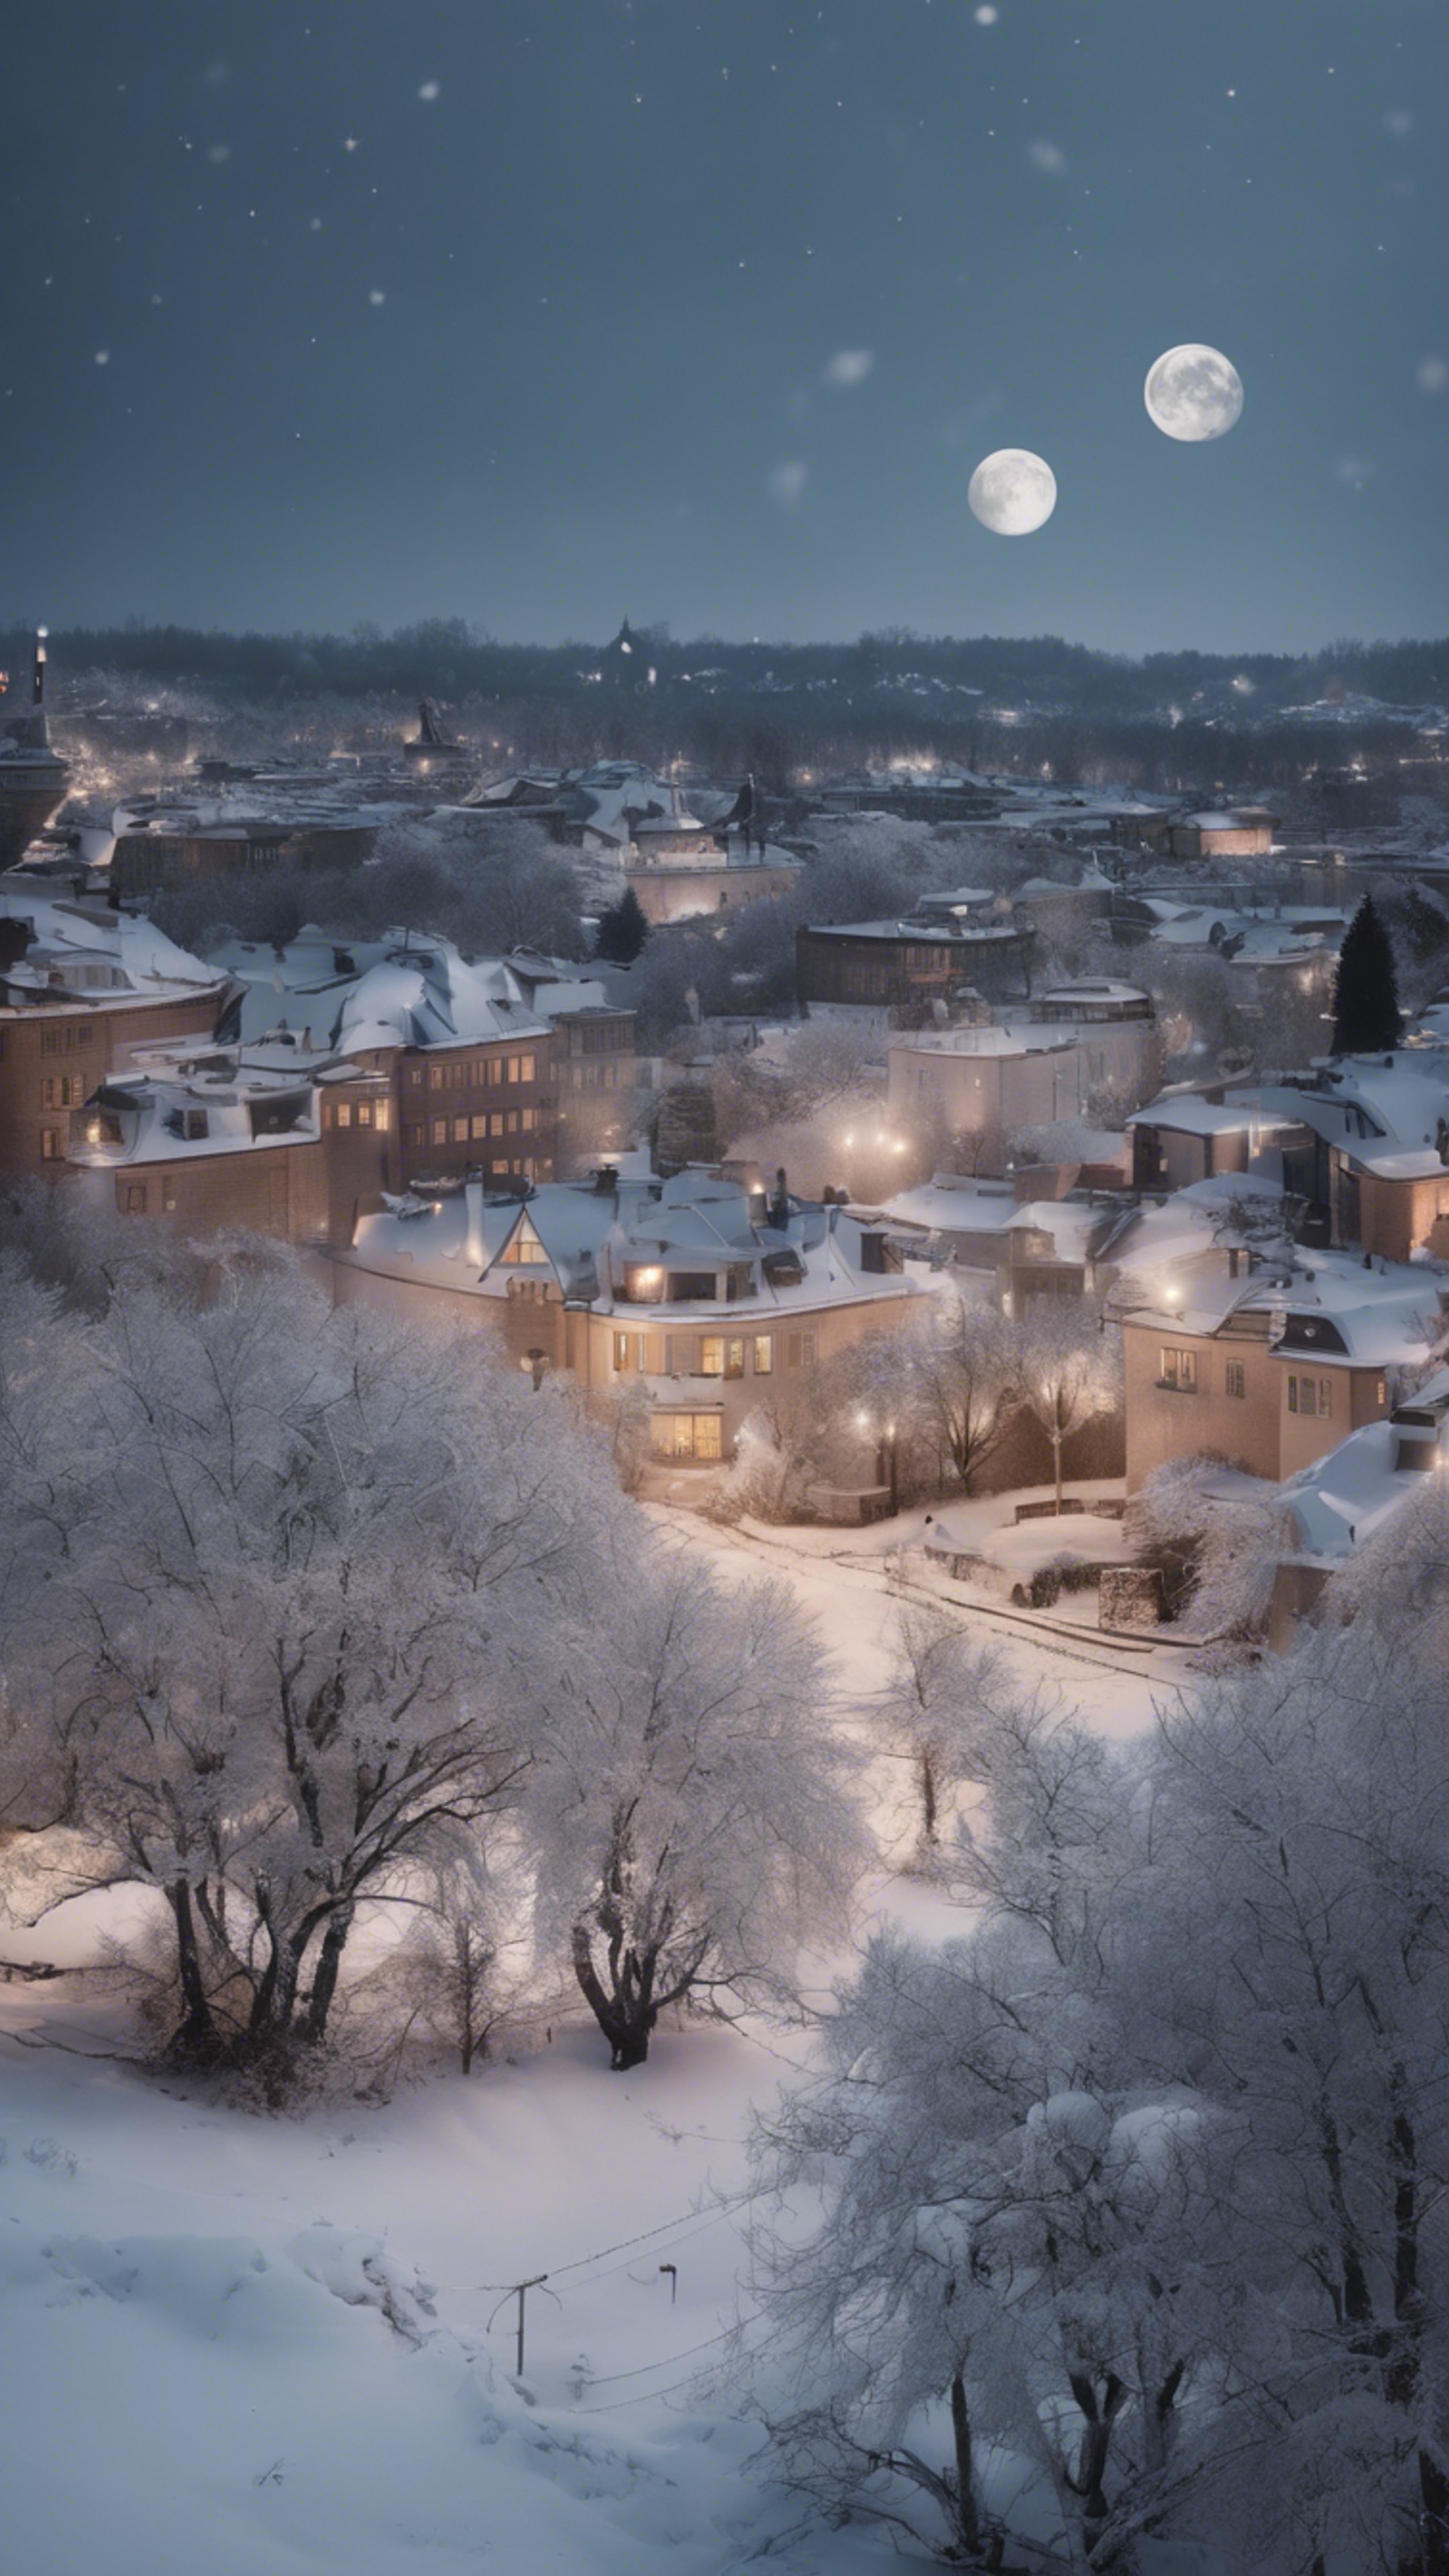 A snowy winter scene, the rooftops and trees covered by cool white snow, the moon casts a silvery glow on the serene town. Валлпапер[b59119720f8642b39e1c]